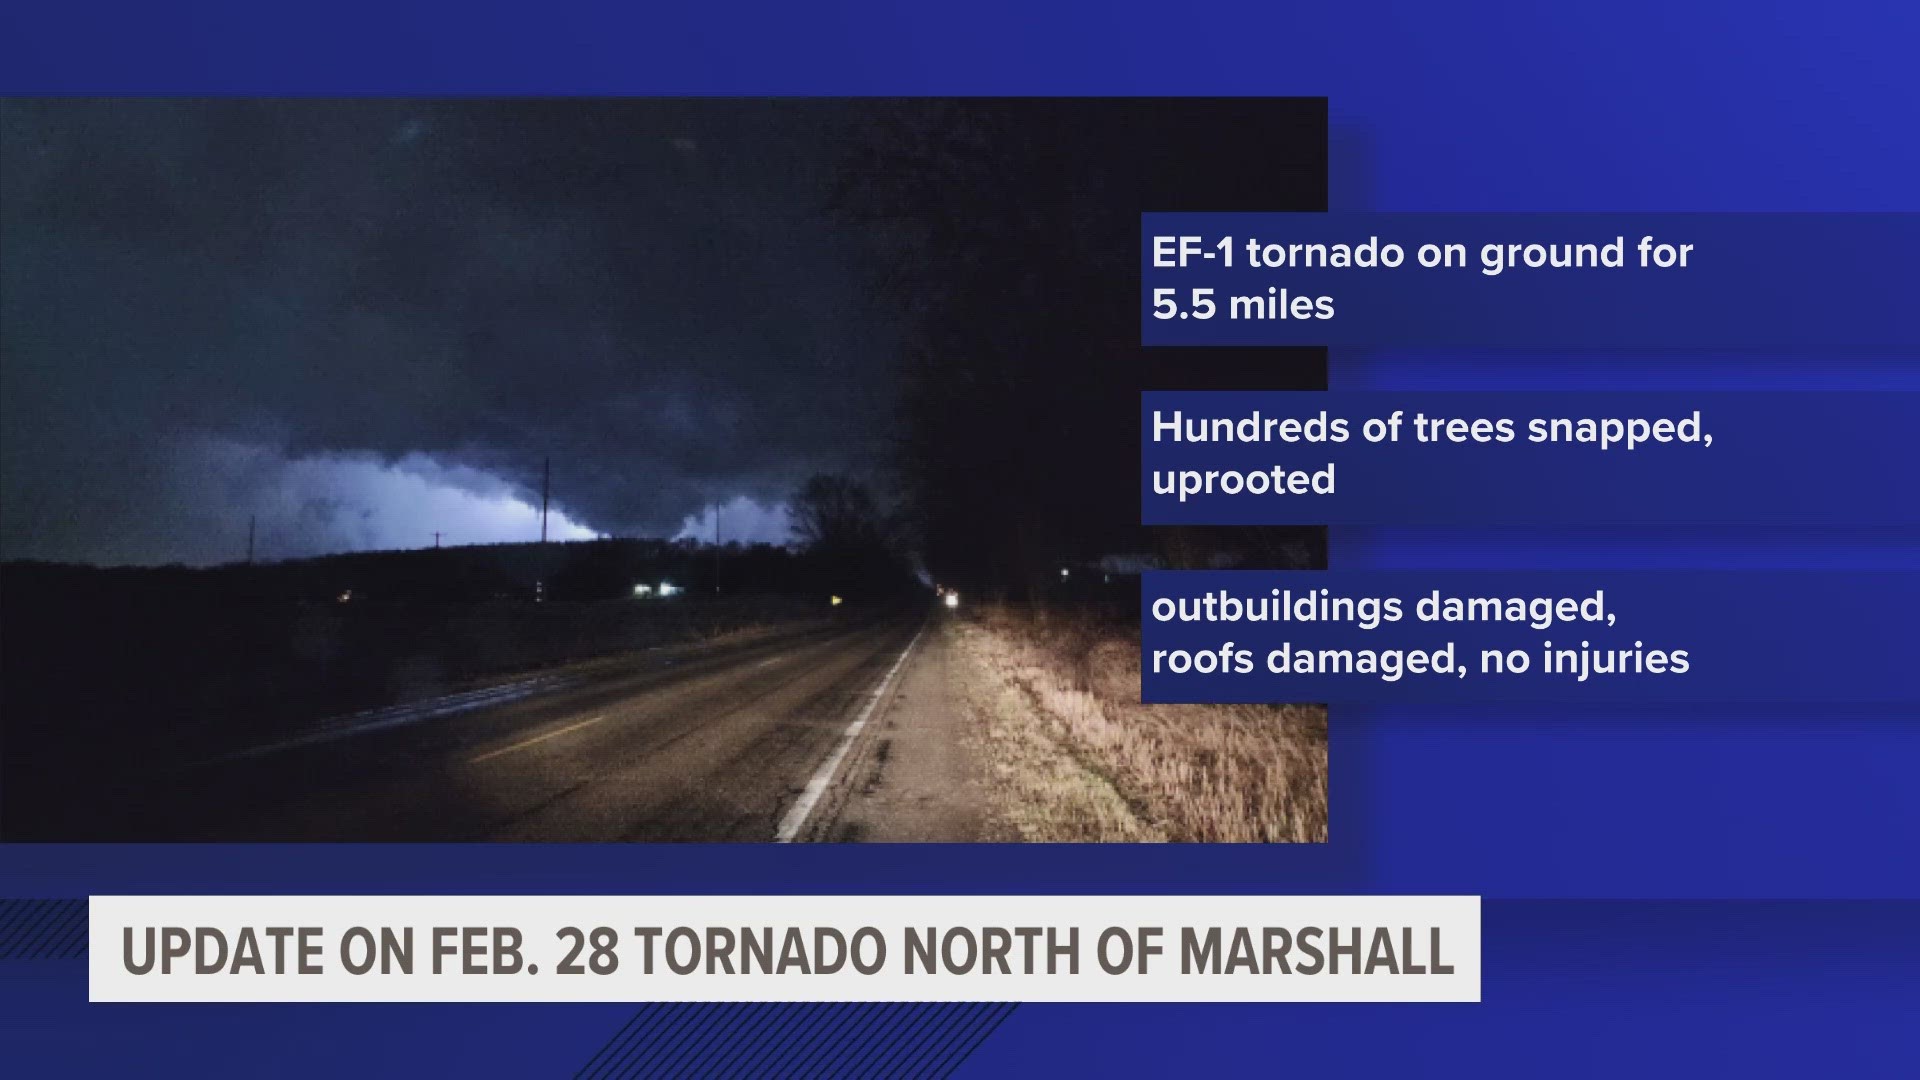 The tornado touched down near 16 1/4 mile road and headed to the northeast uprooting hundreds of trees, damaging buildings and homes in its path.